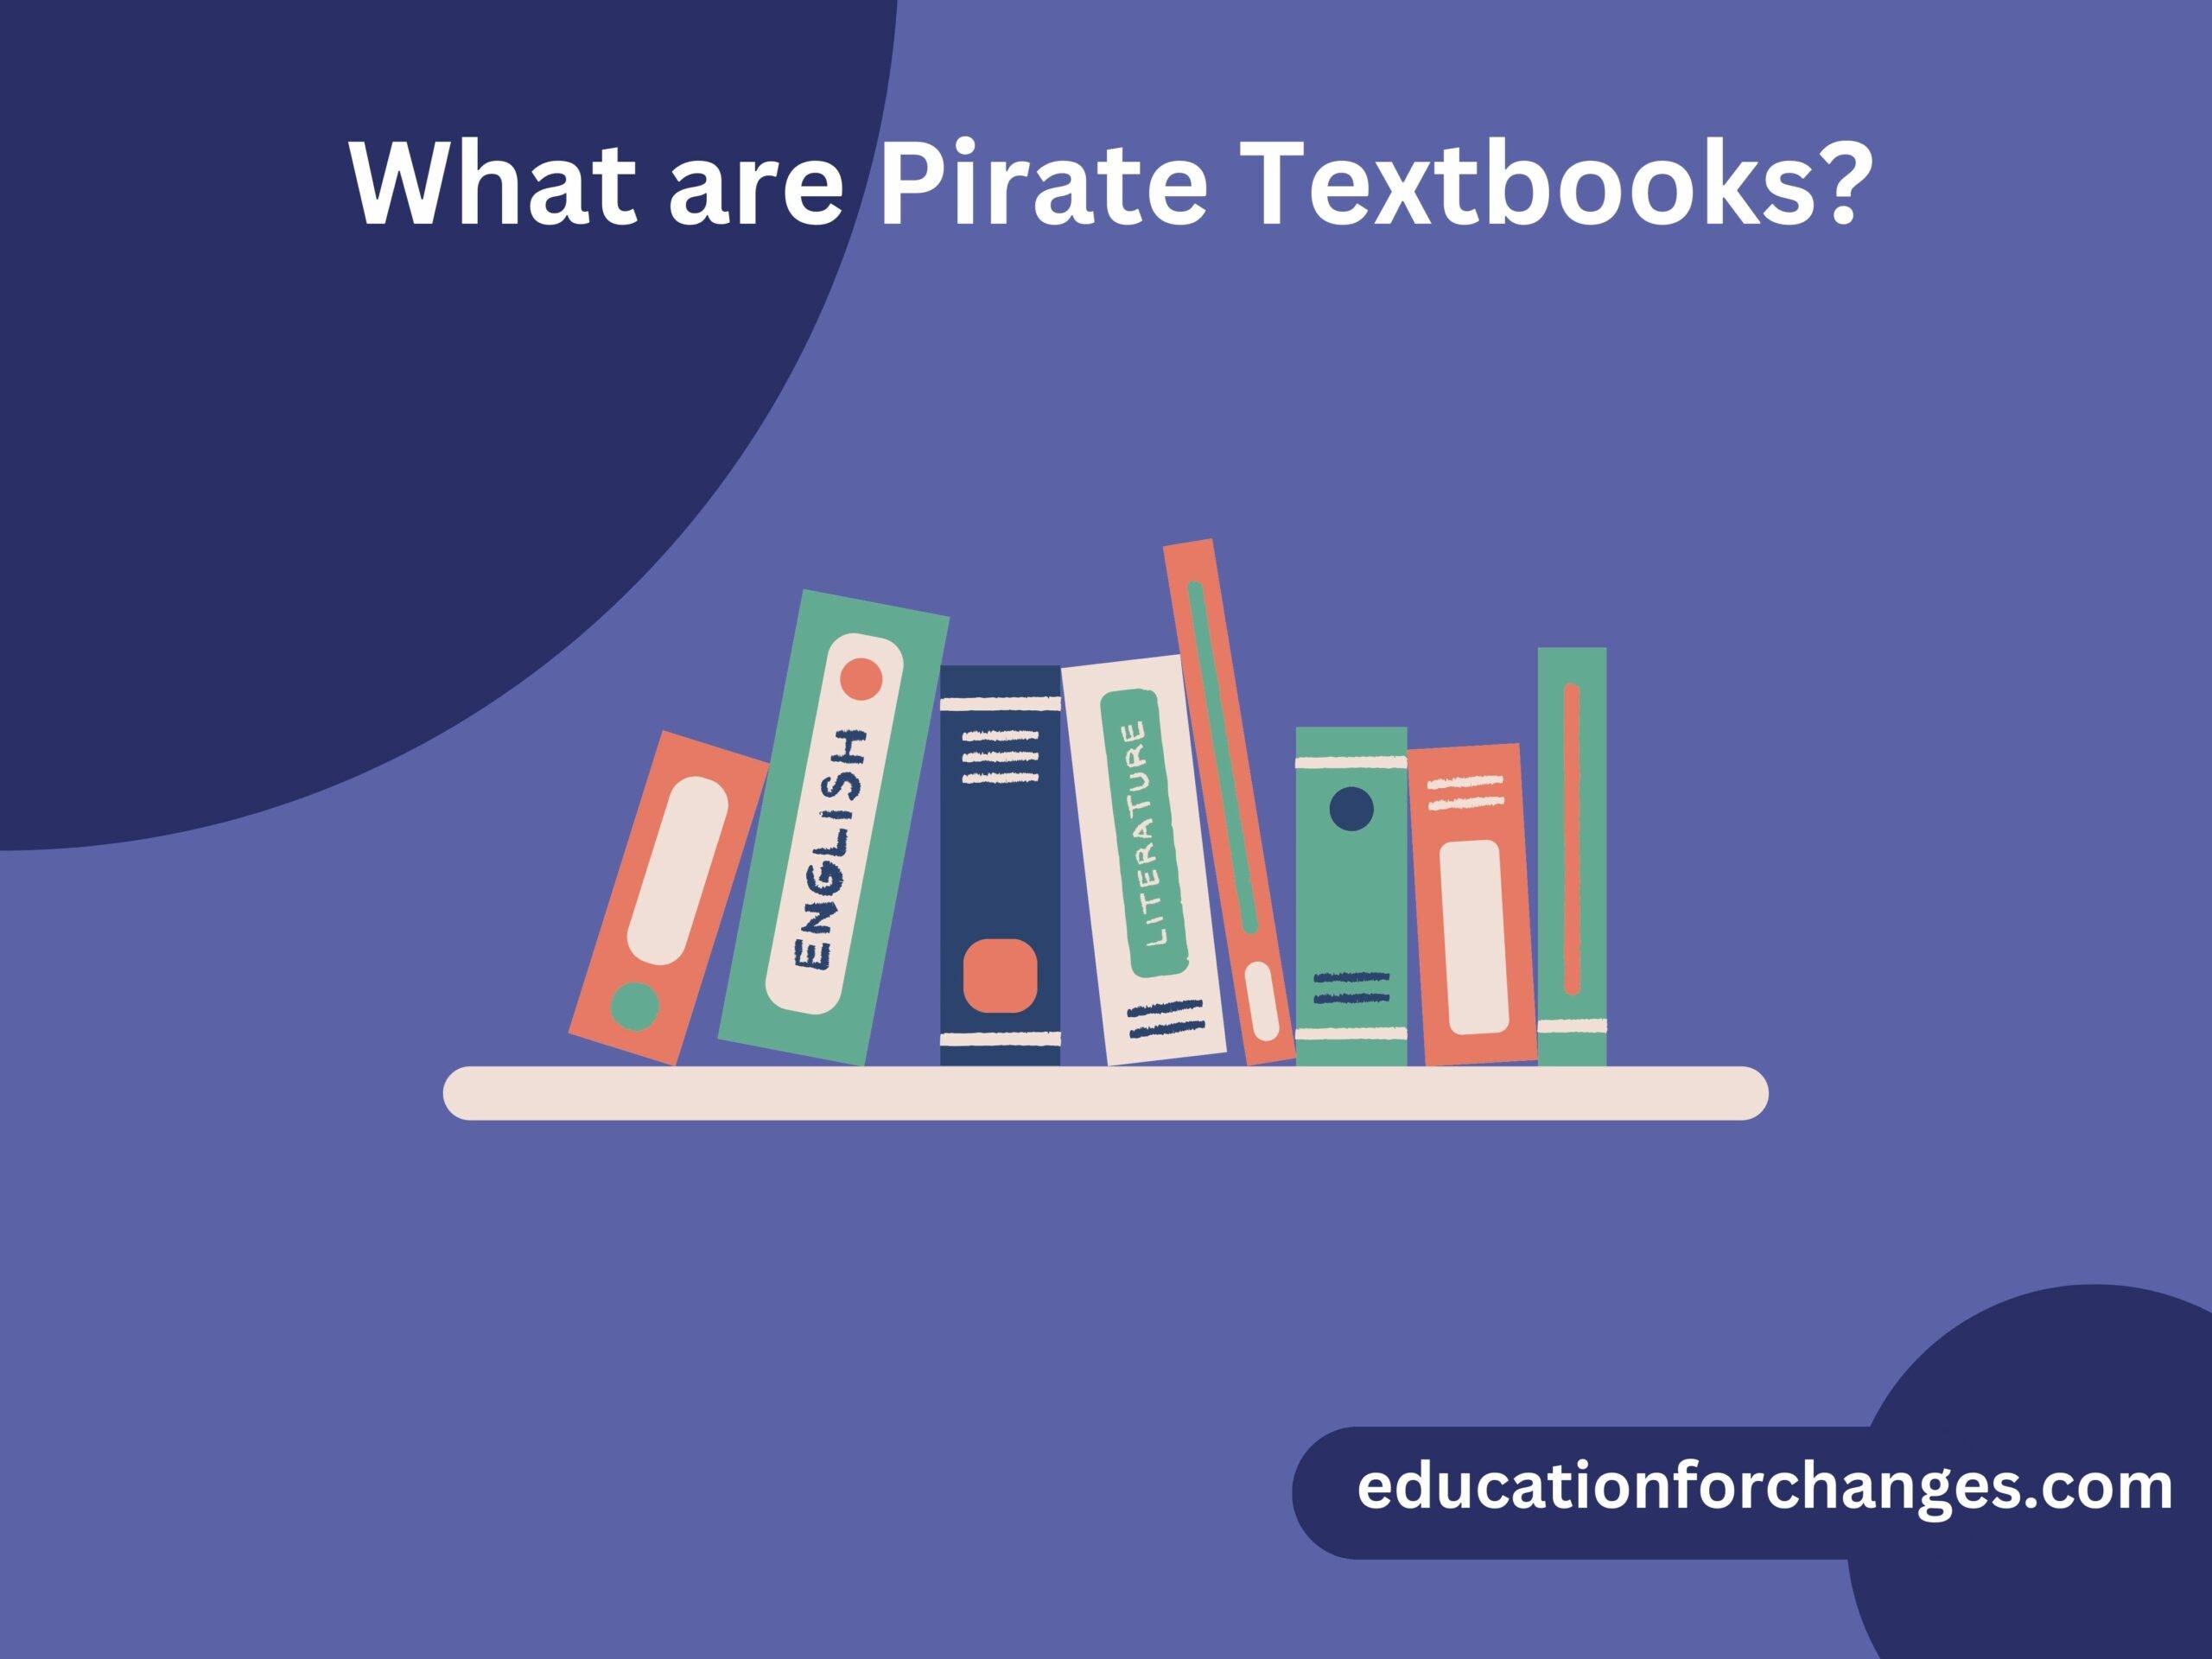 What are Pirate Textbooks